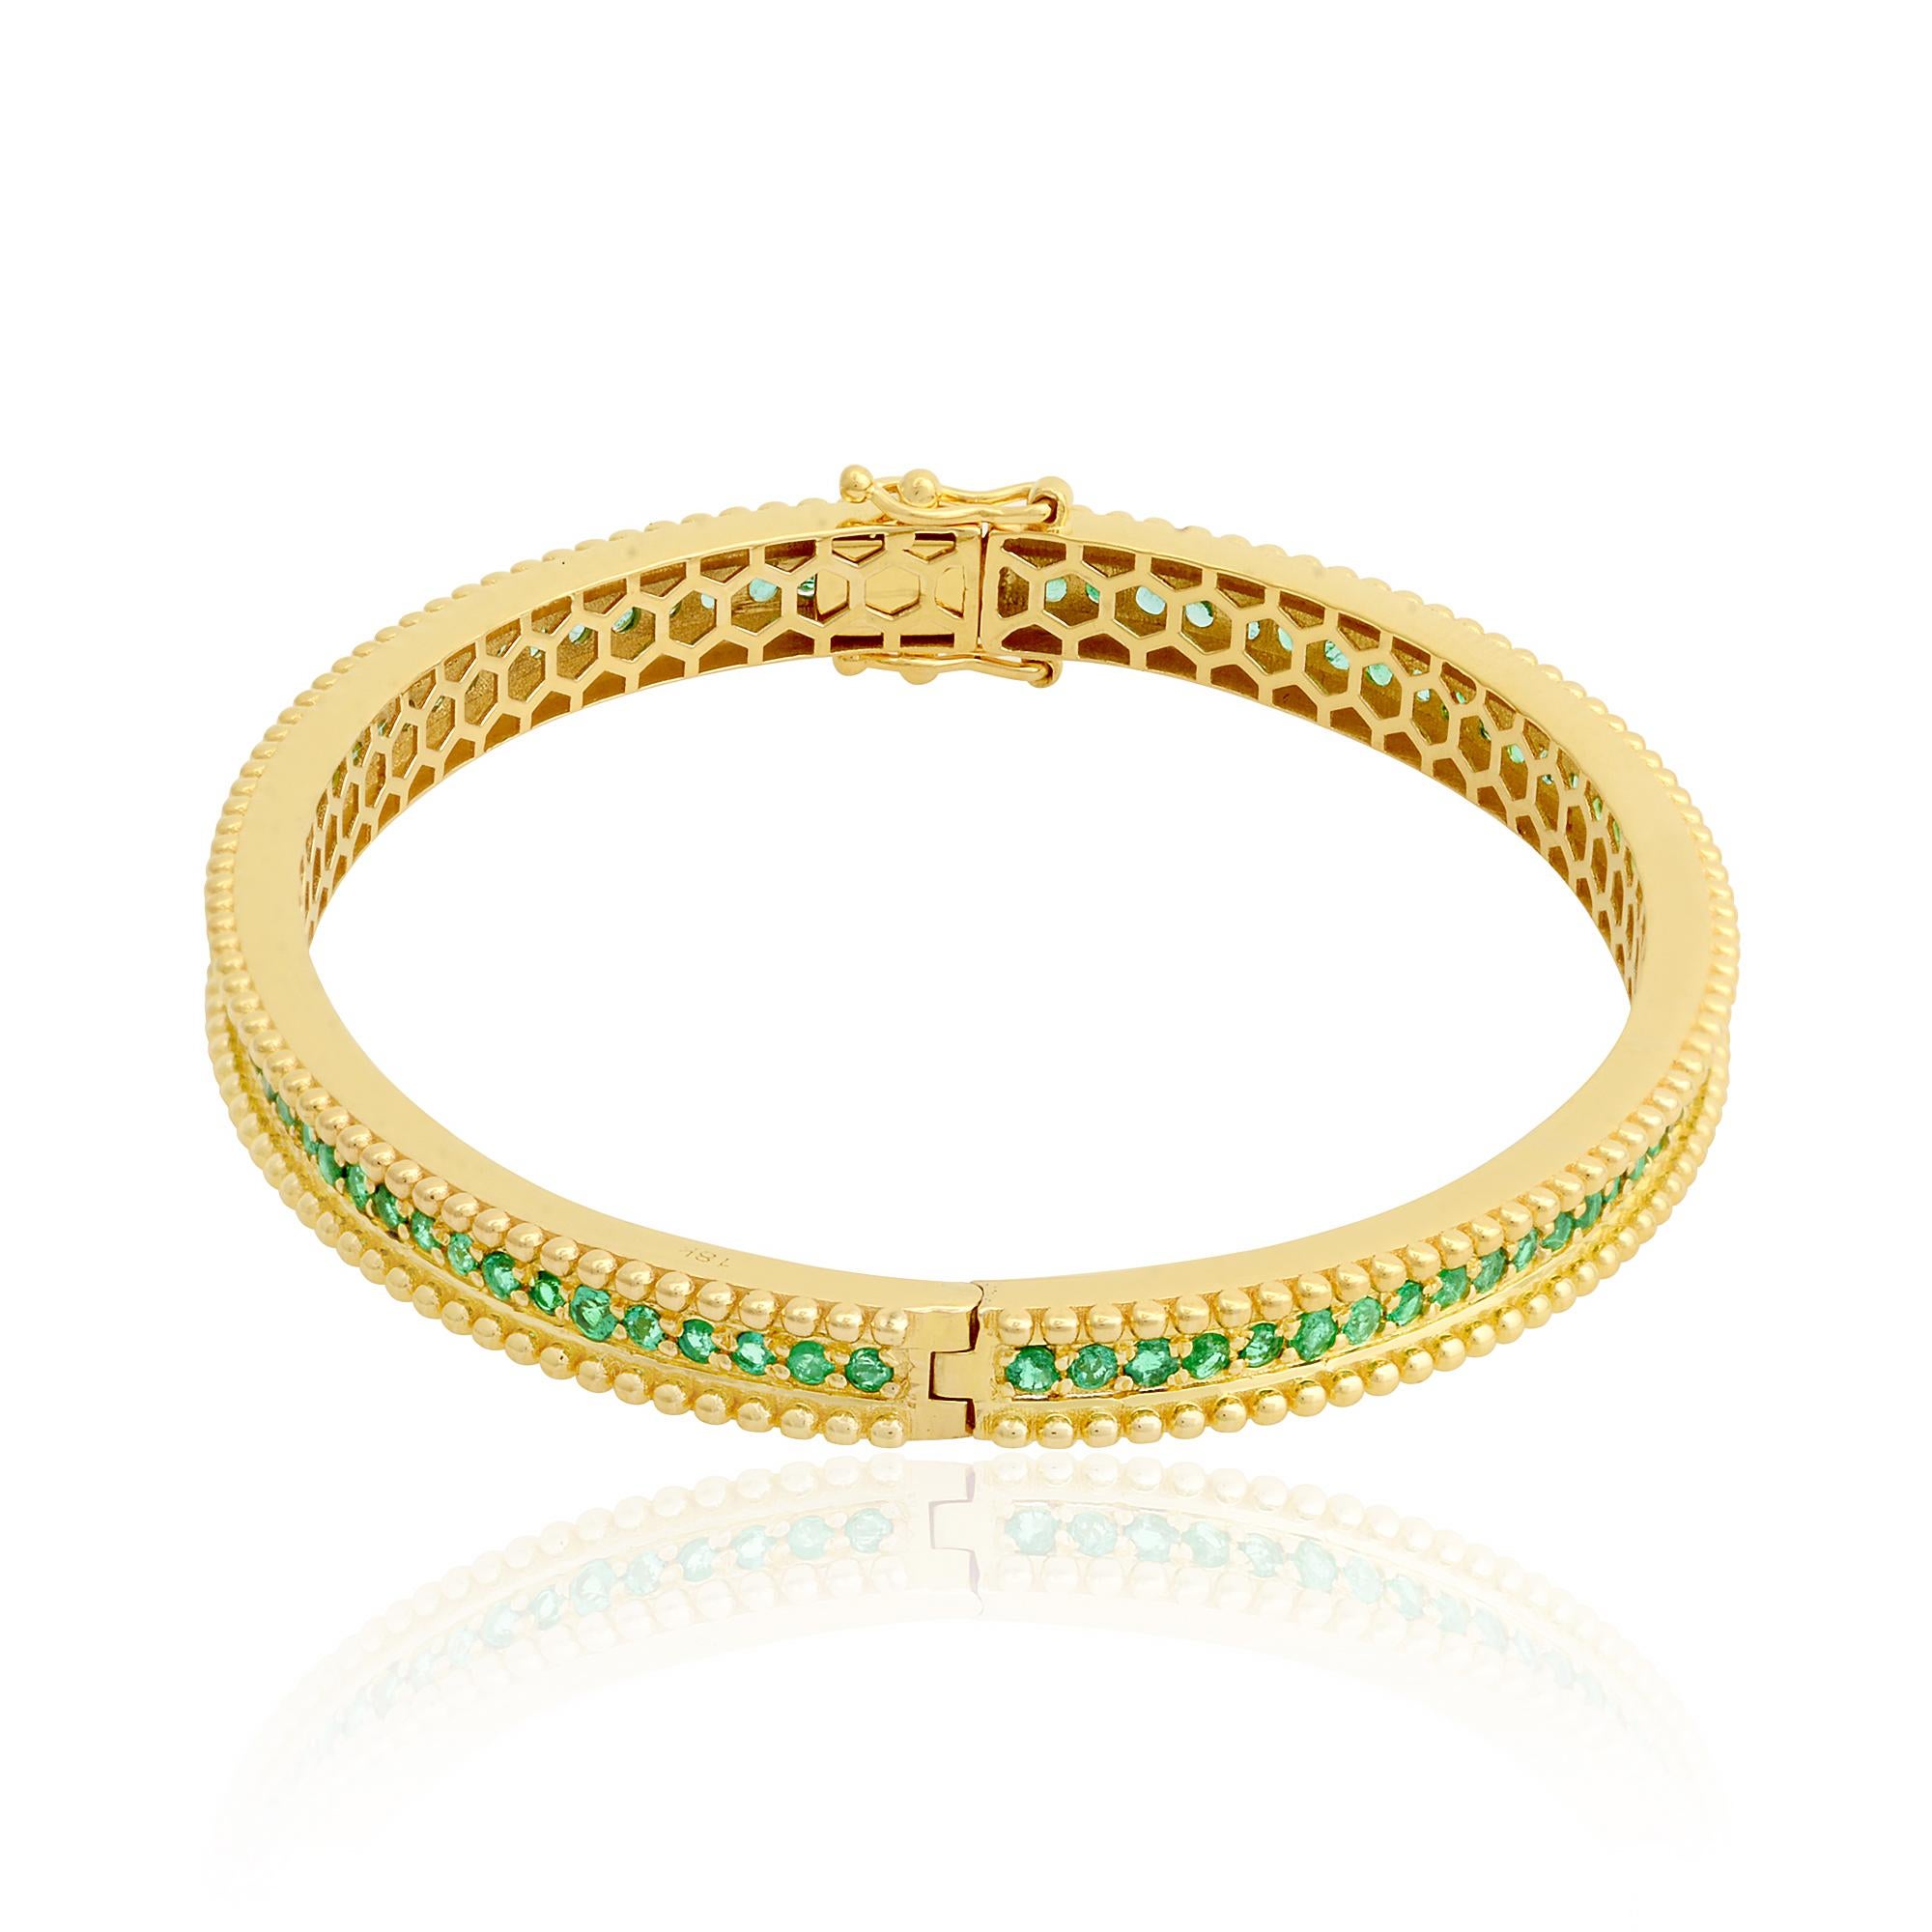 Item Code :- SEB-6072A
Gross Wt. :- 18.95 gm
18k Yellow Gold Wt. :- 18.45 gm
Emerald Wt. :- 2.51 Ct.

✦ Sizing
.....................
We can adjust most items to fit your sizing preferences. Most items can be made to any size and length. Please leave